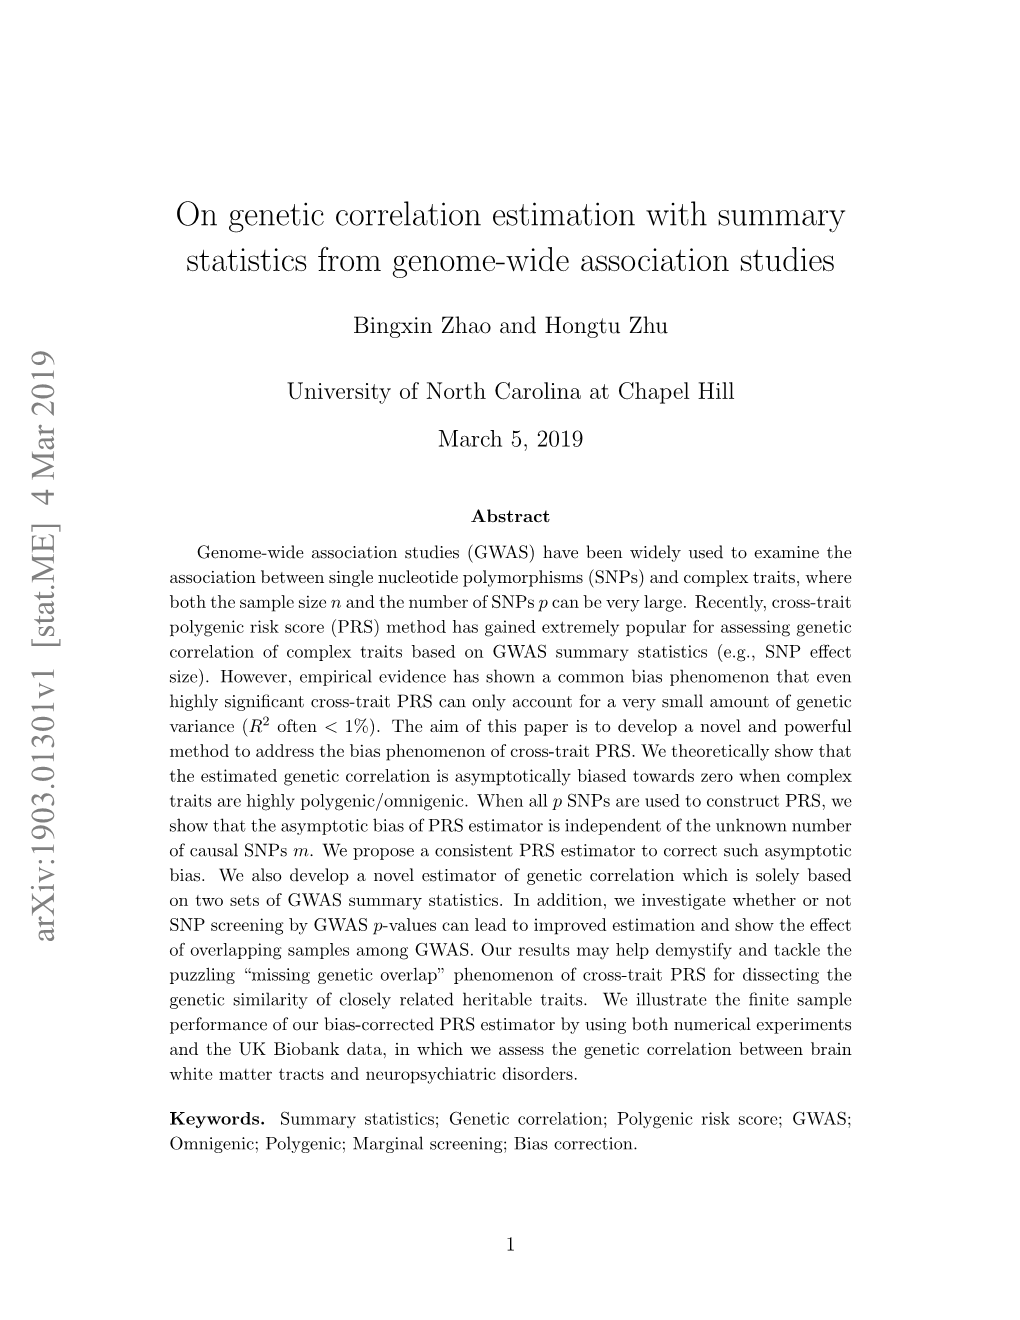 On Genetic Correlation Estimation with Summary Statistics from Genome-Wide Association Studies